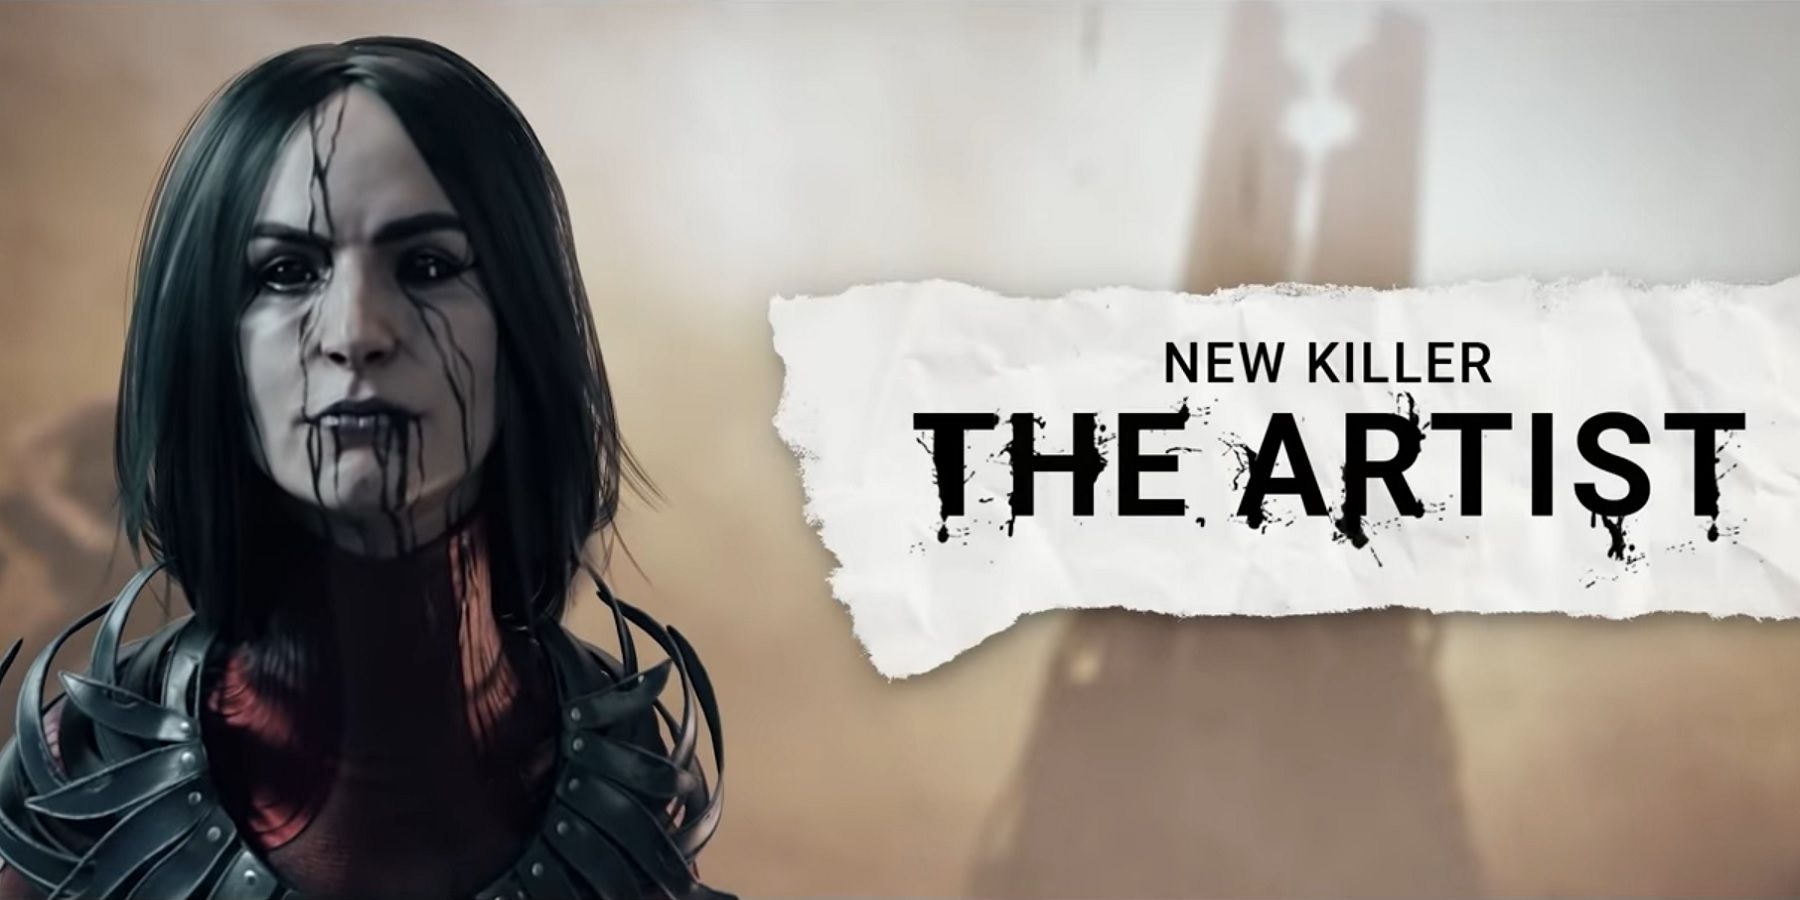 An image from Dead By Daylight showing the new killer, The Artist.